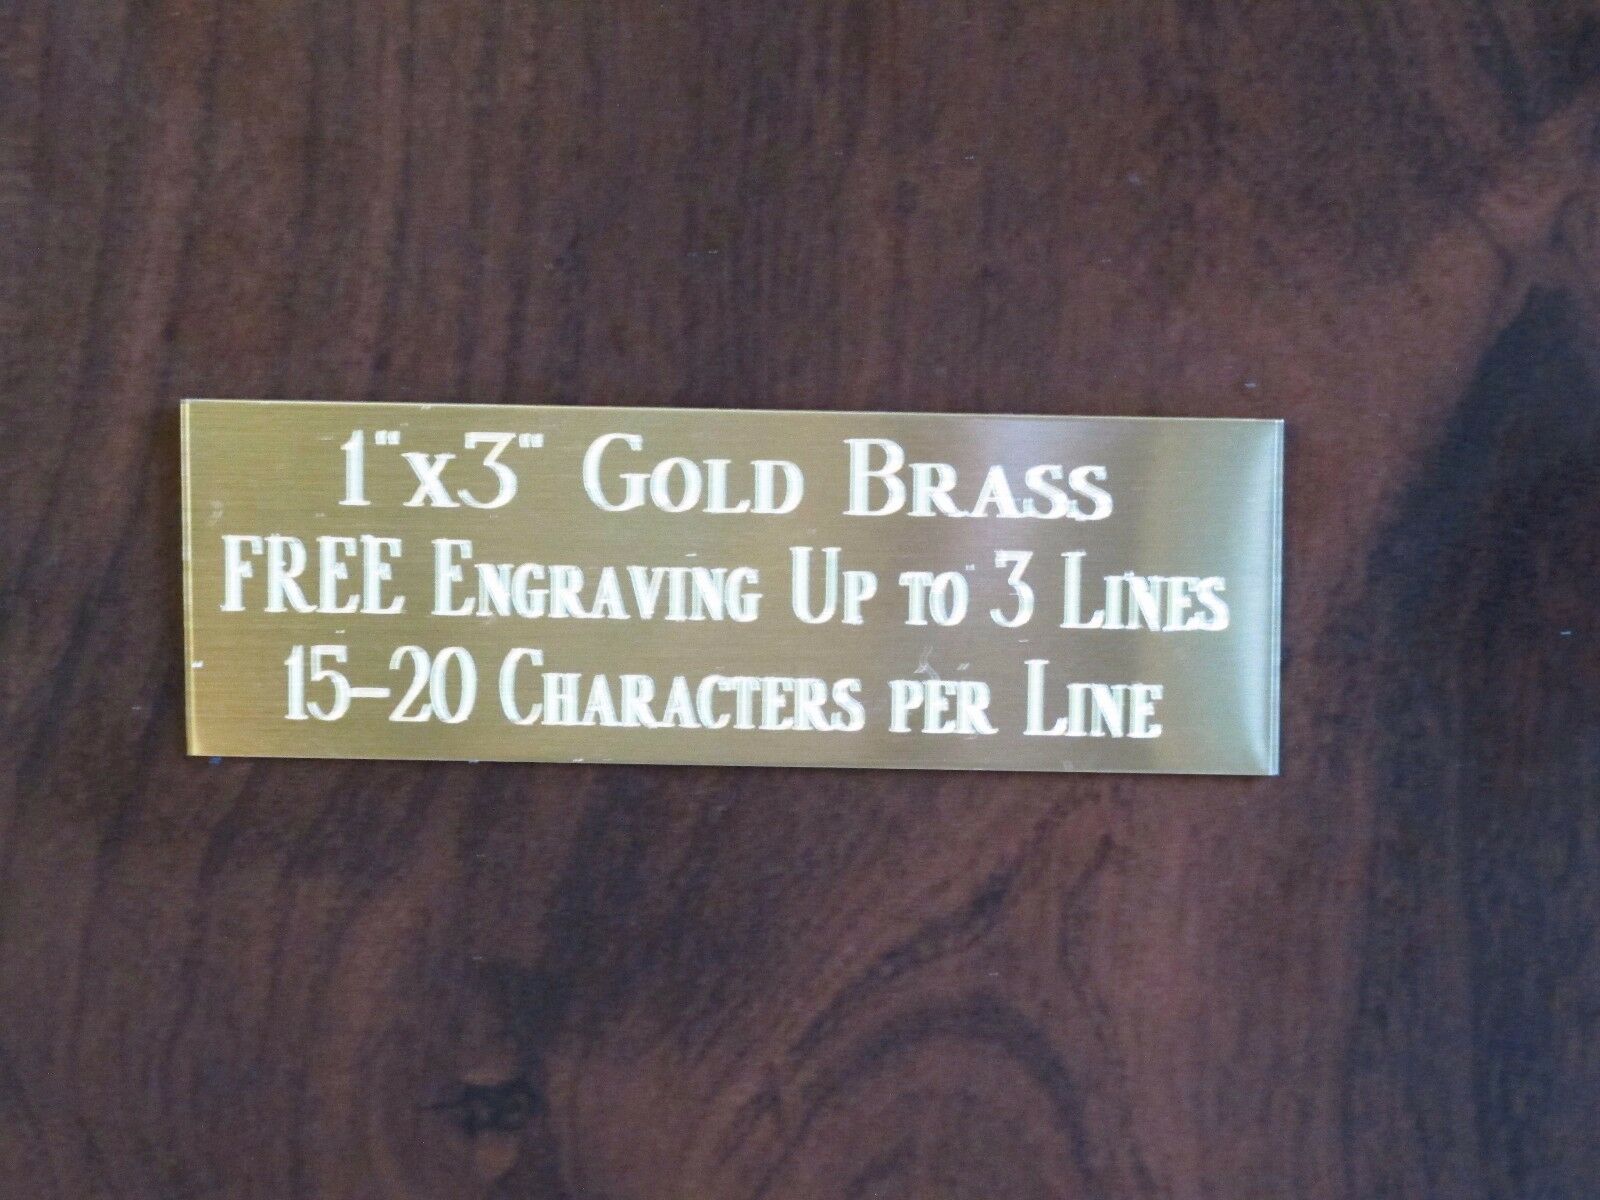 1"x3" Gold Brass Name Plate Art-trophies-gift-taxidermy-flag Case Free Engrave